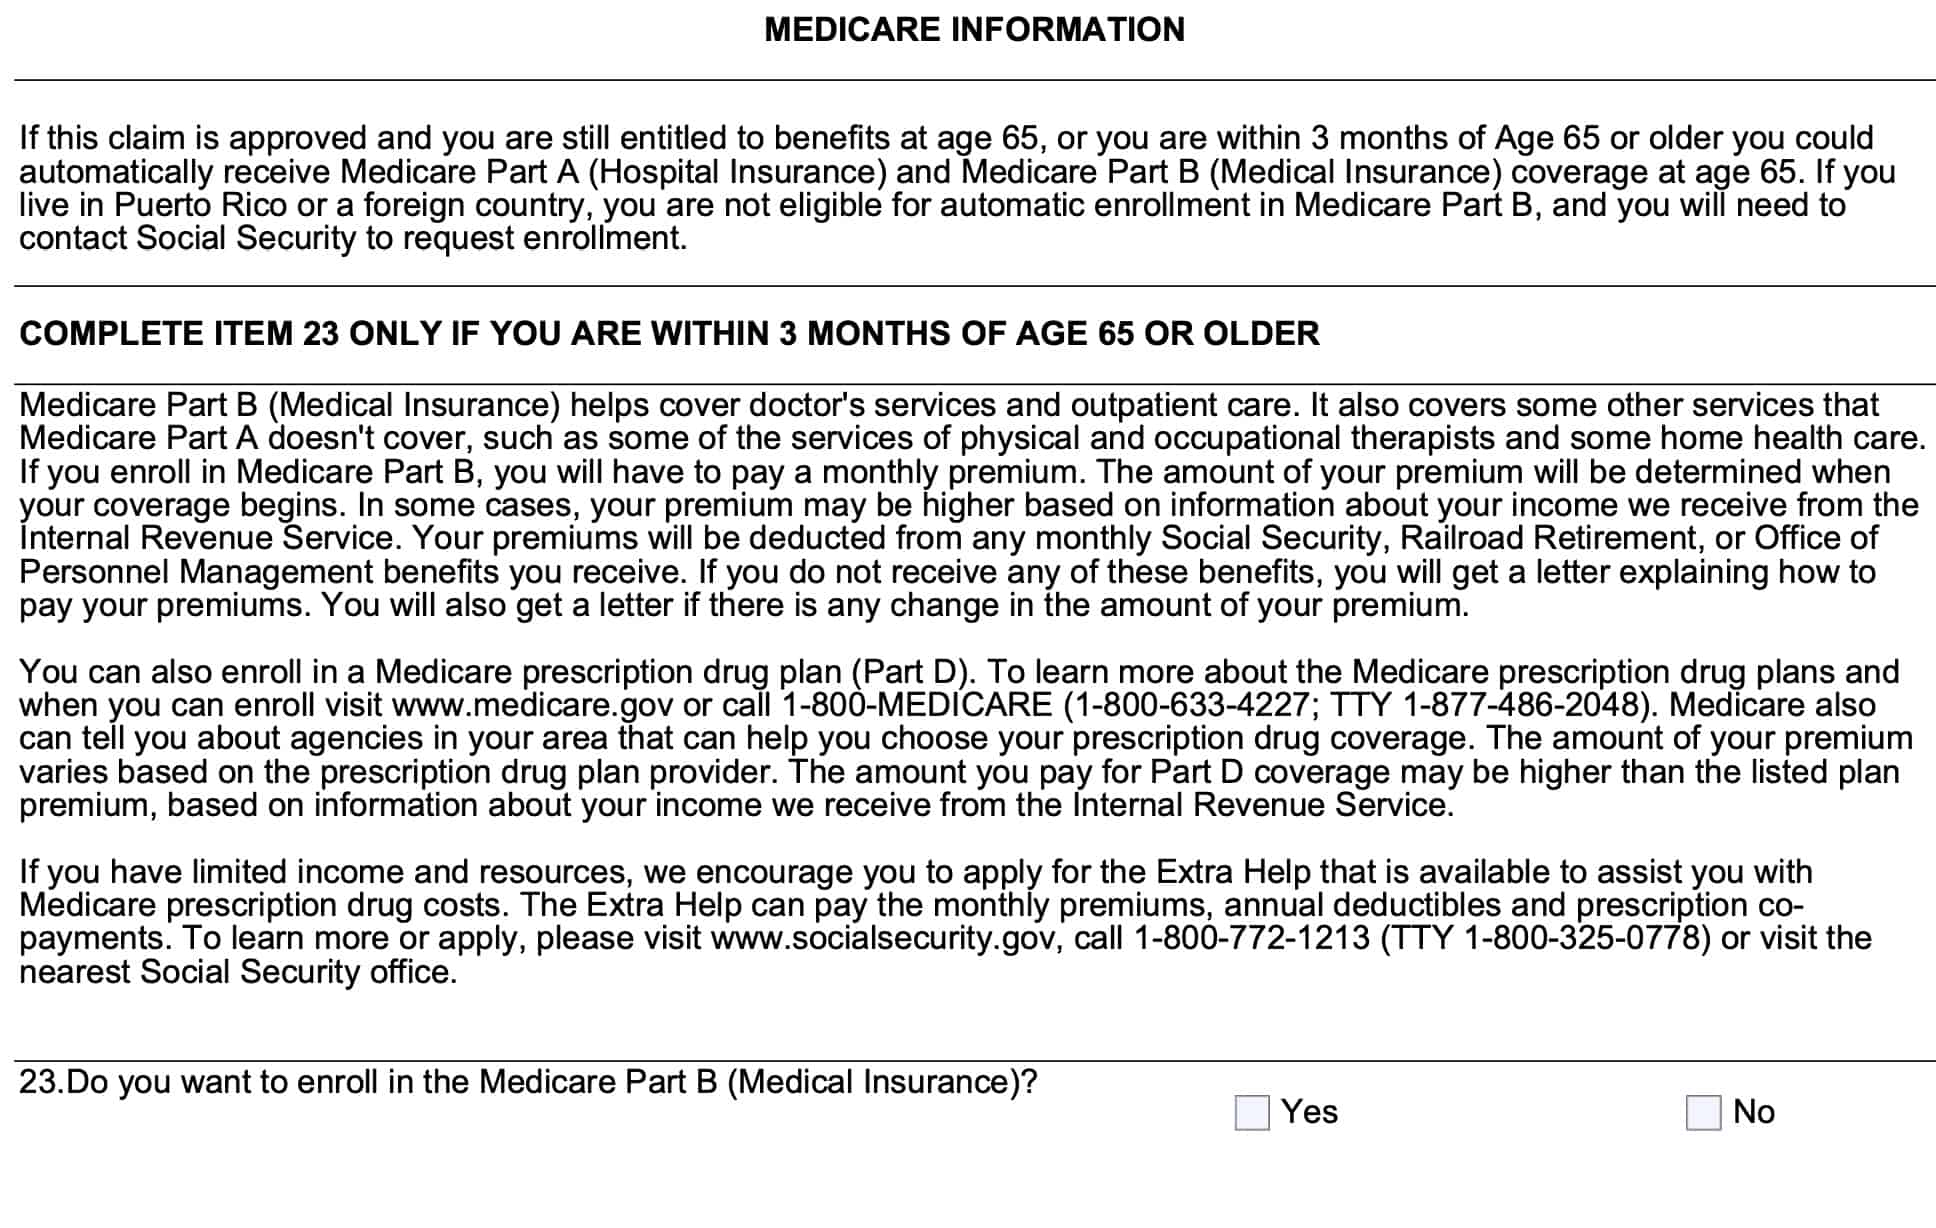 medicare information-do you want to enroll?